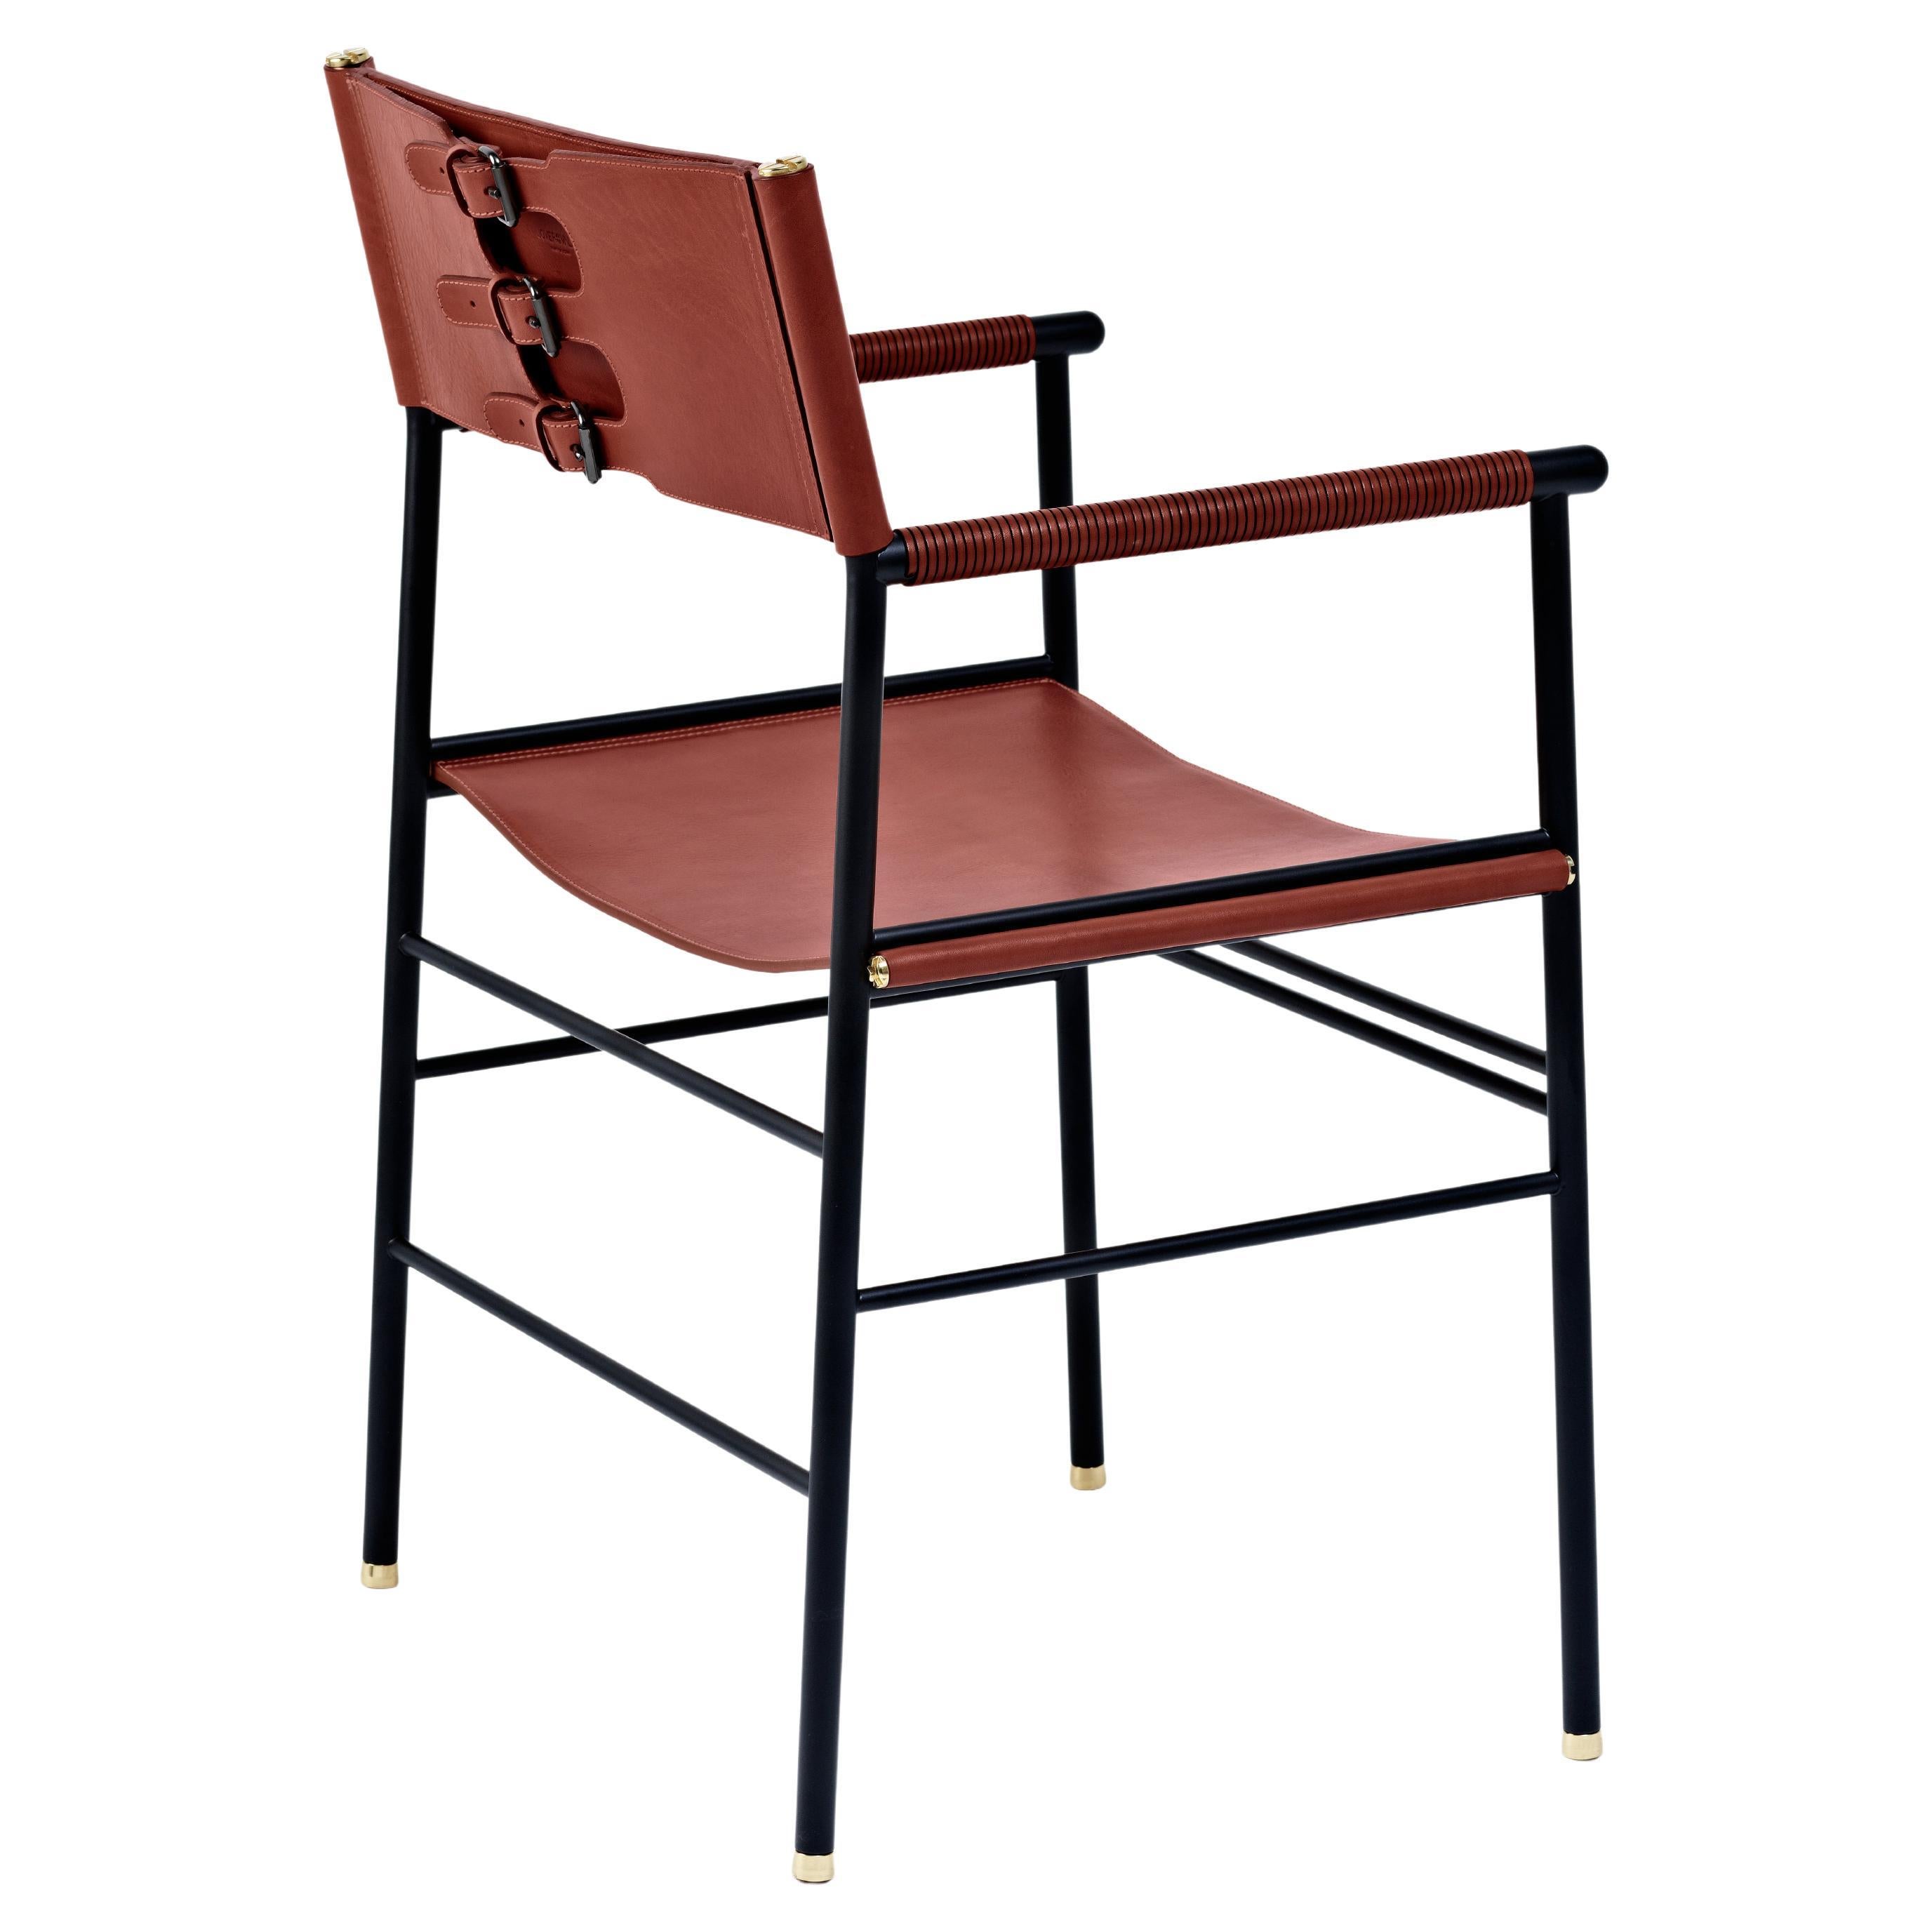 Artisanal Contemporary Chair Cognac Leather & Black Rubber Metal For Sale